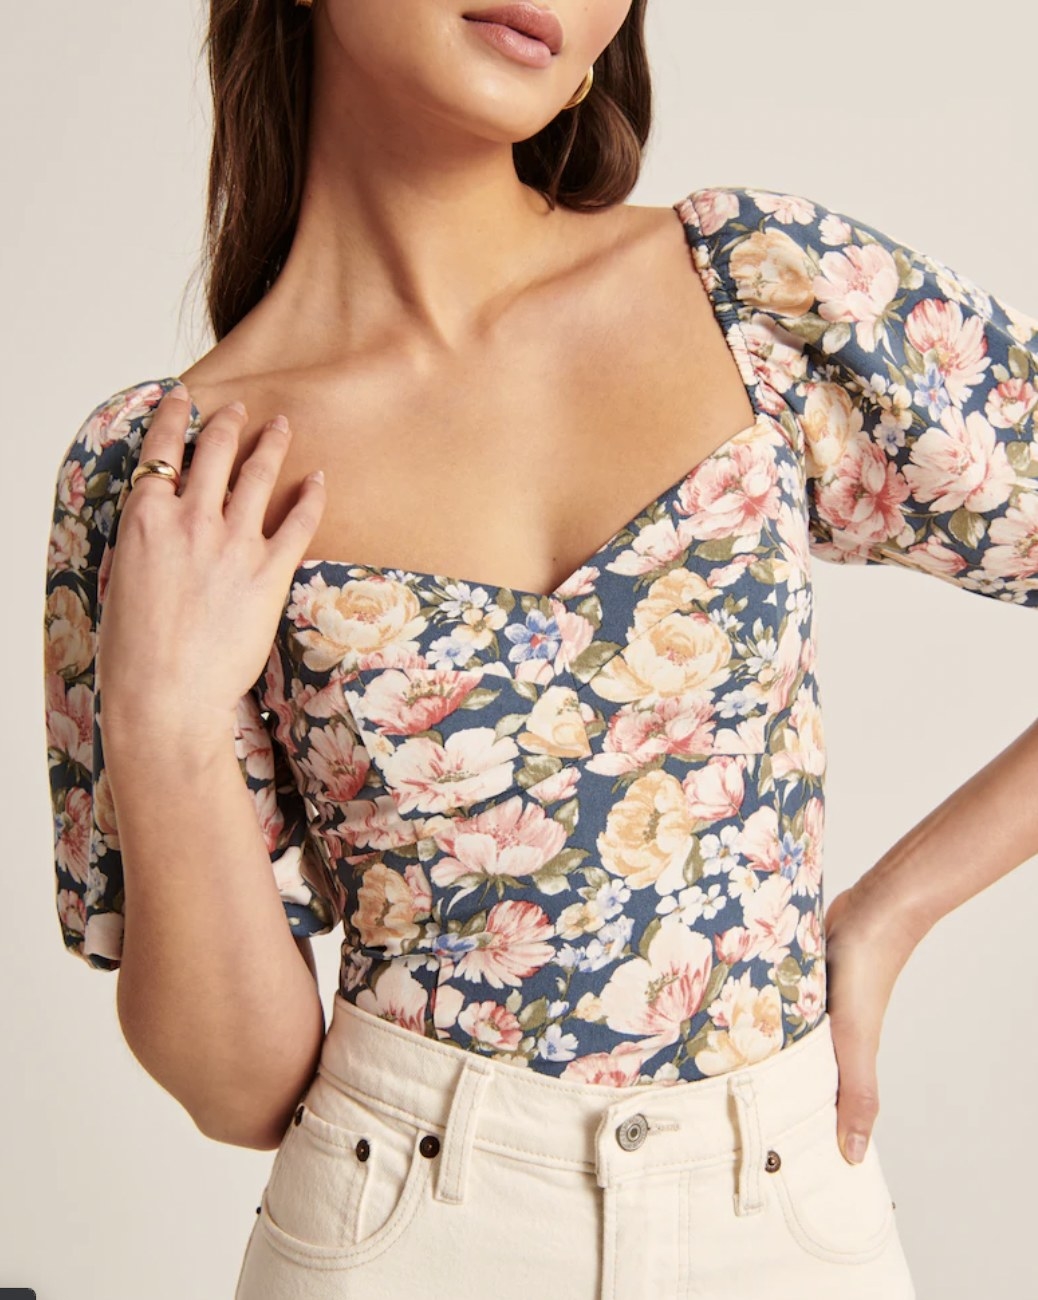 The floral corset top tucked into white jeans